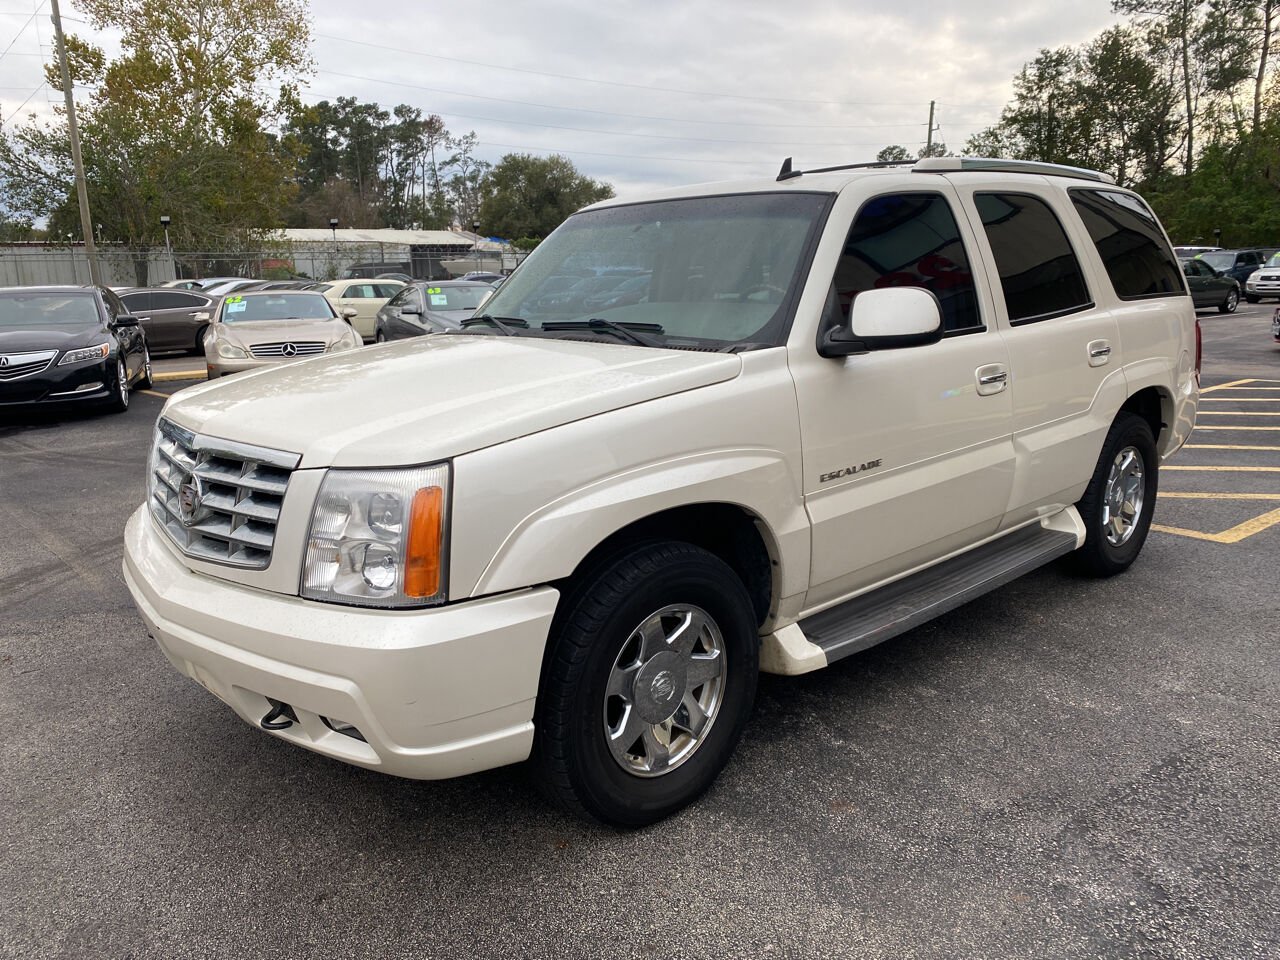 2006 Cadillac Escalade For Sale In Indianapolis, IN - Carsforsale.com®